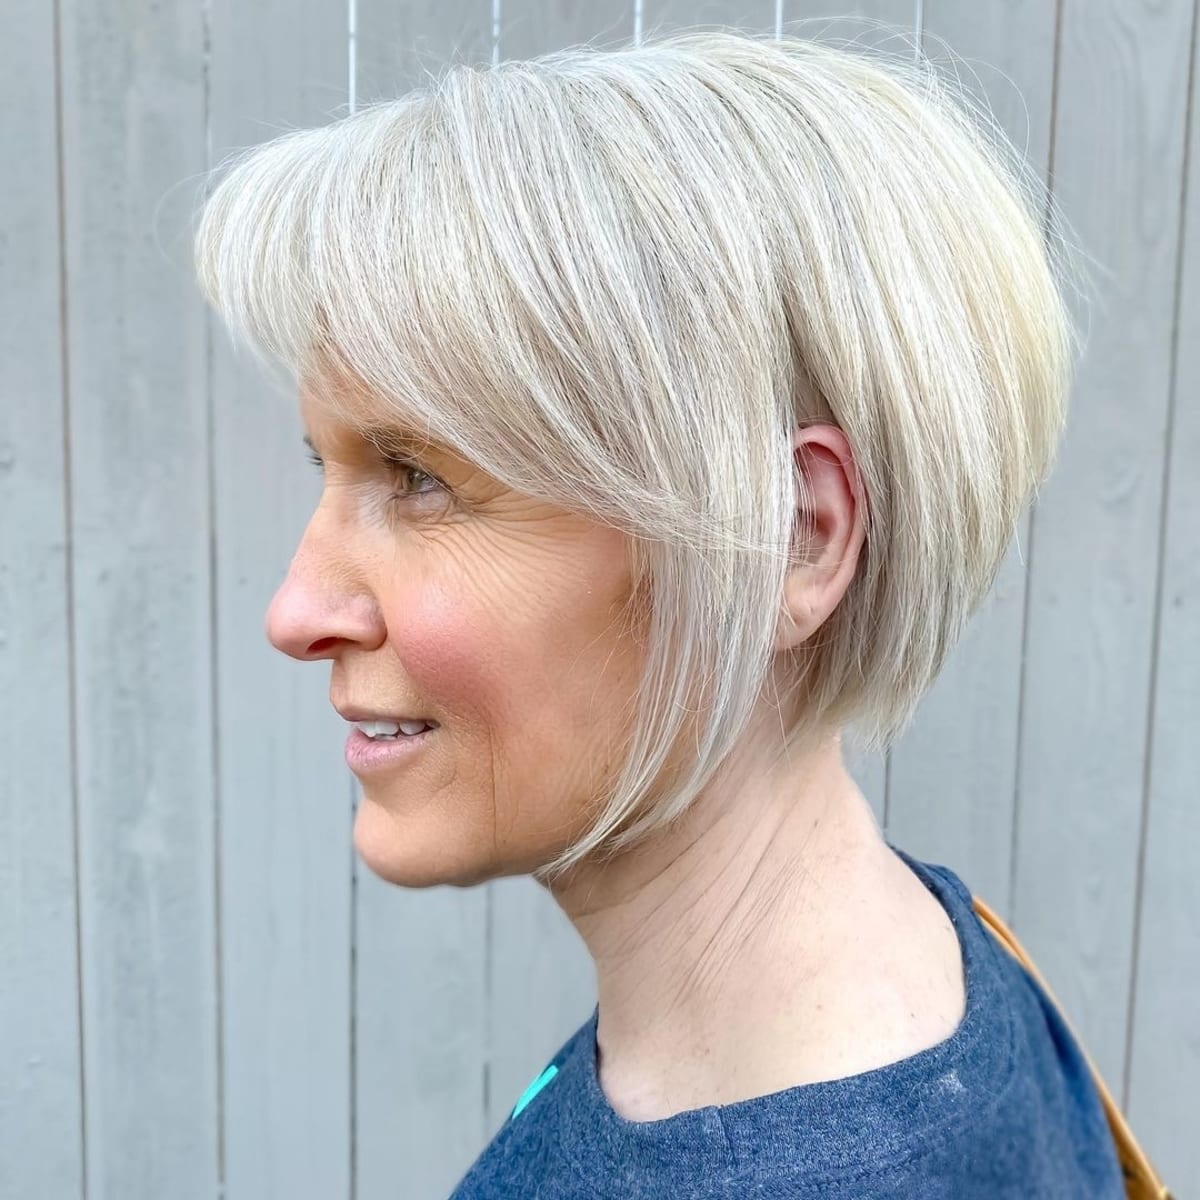 21 Modern Layered Bob Haircuts for Women Over 50 to Take Years Off